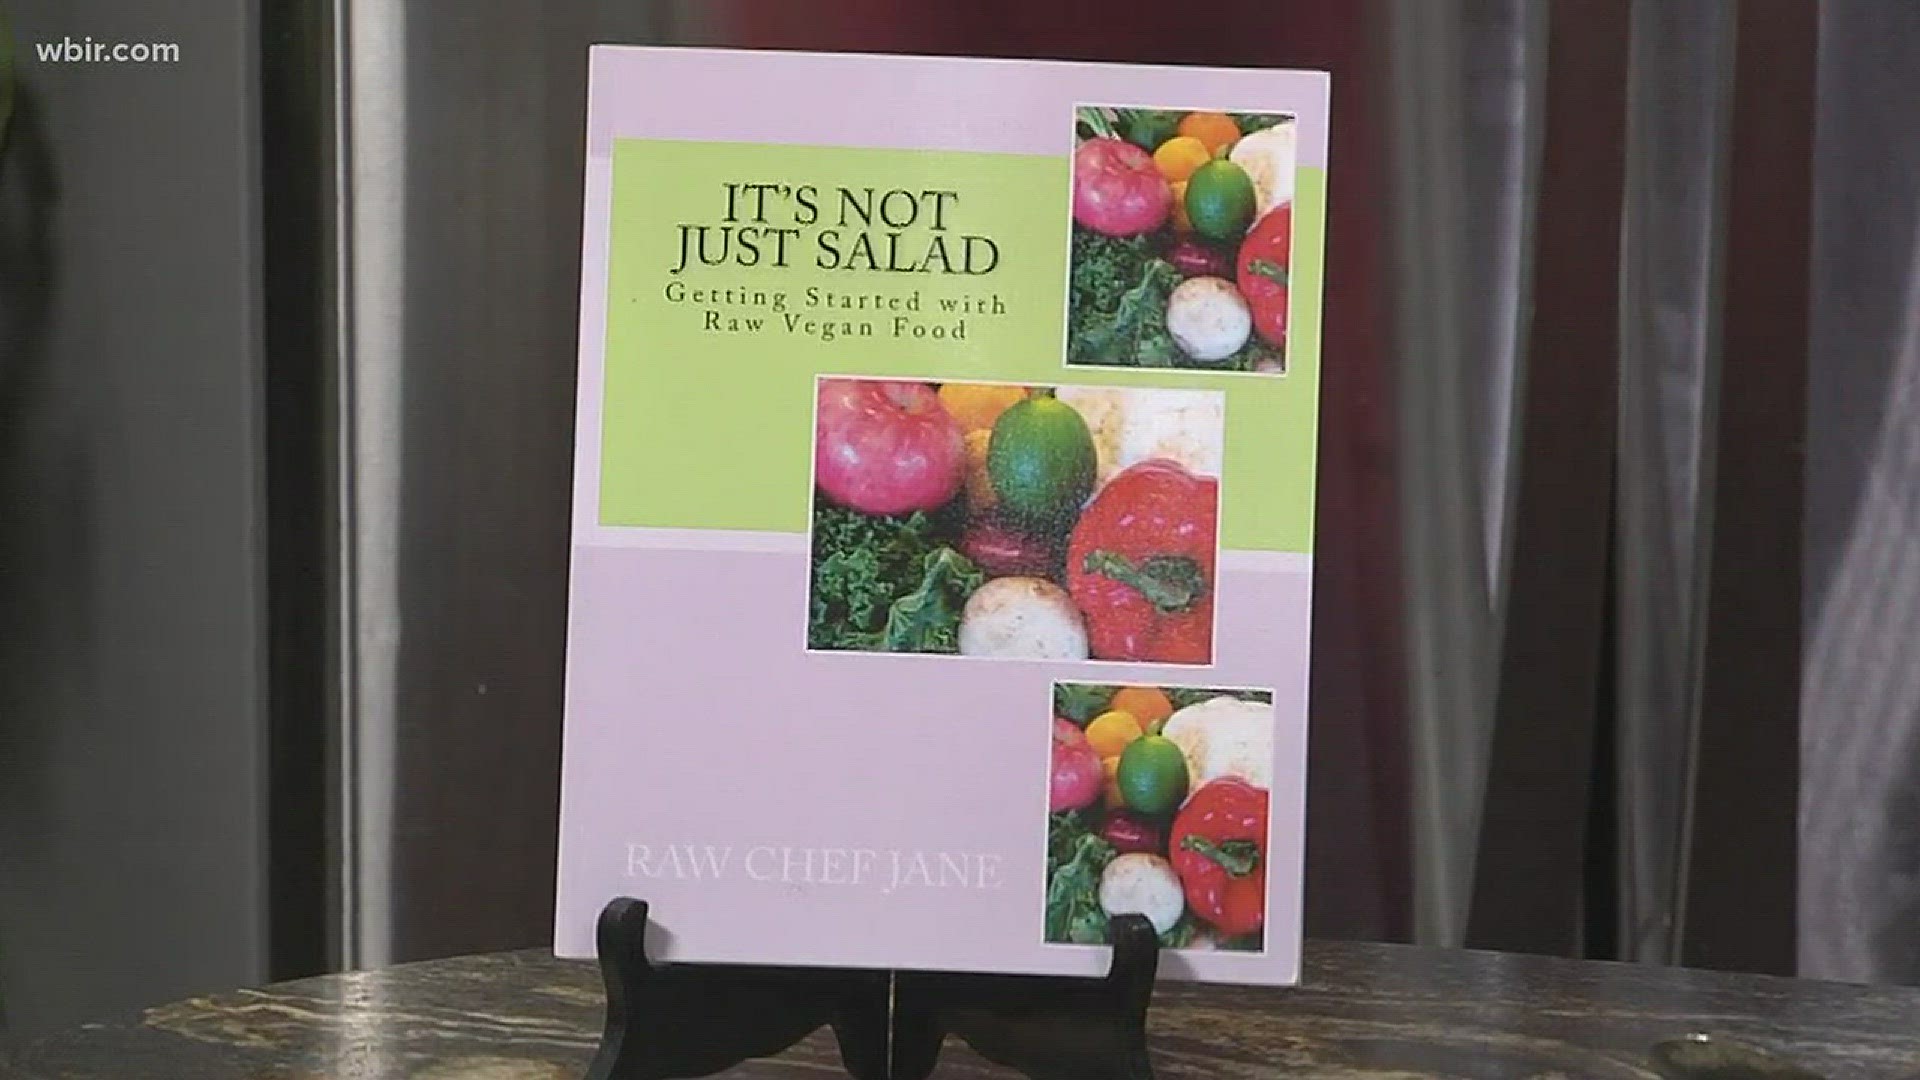 To learn more about Jane Karuschkat's cookbook and business visit rawchefjane.com or follow her on Facebook: Raw Chef Jane.March 19, 2018-4pm